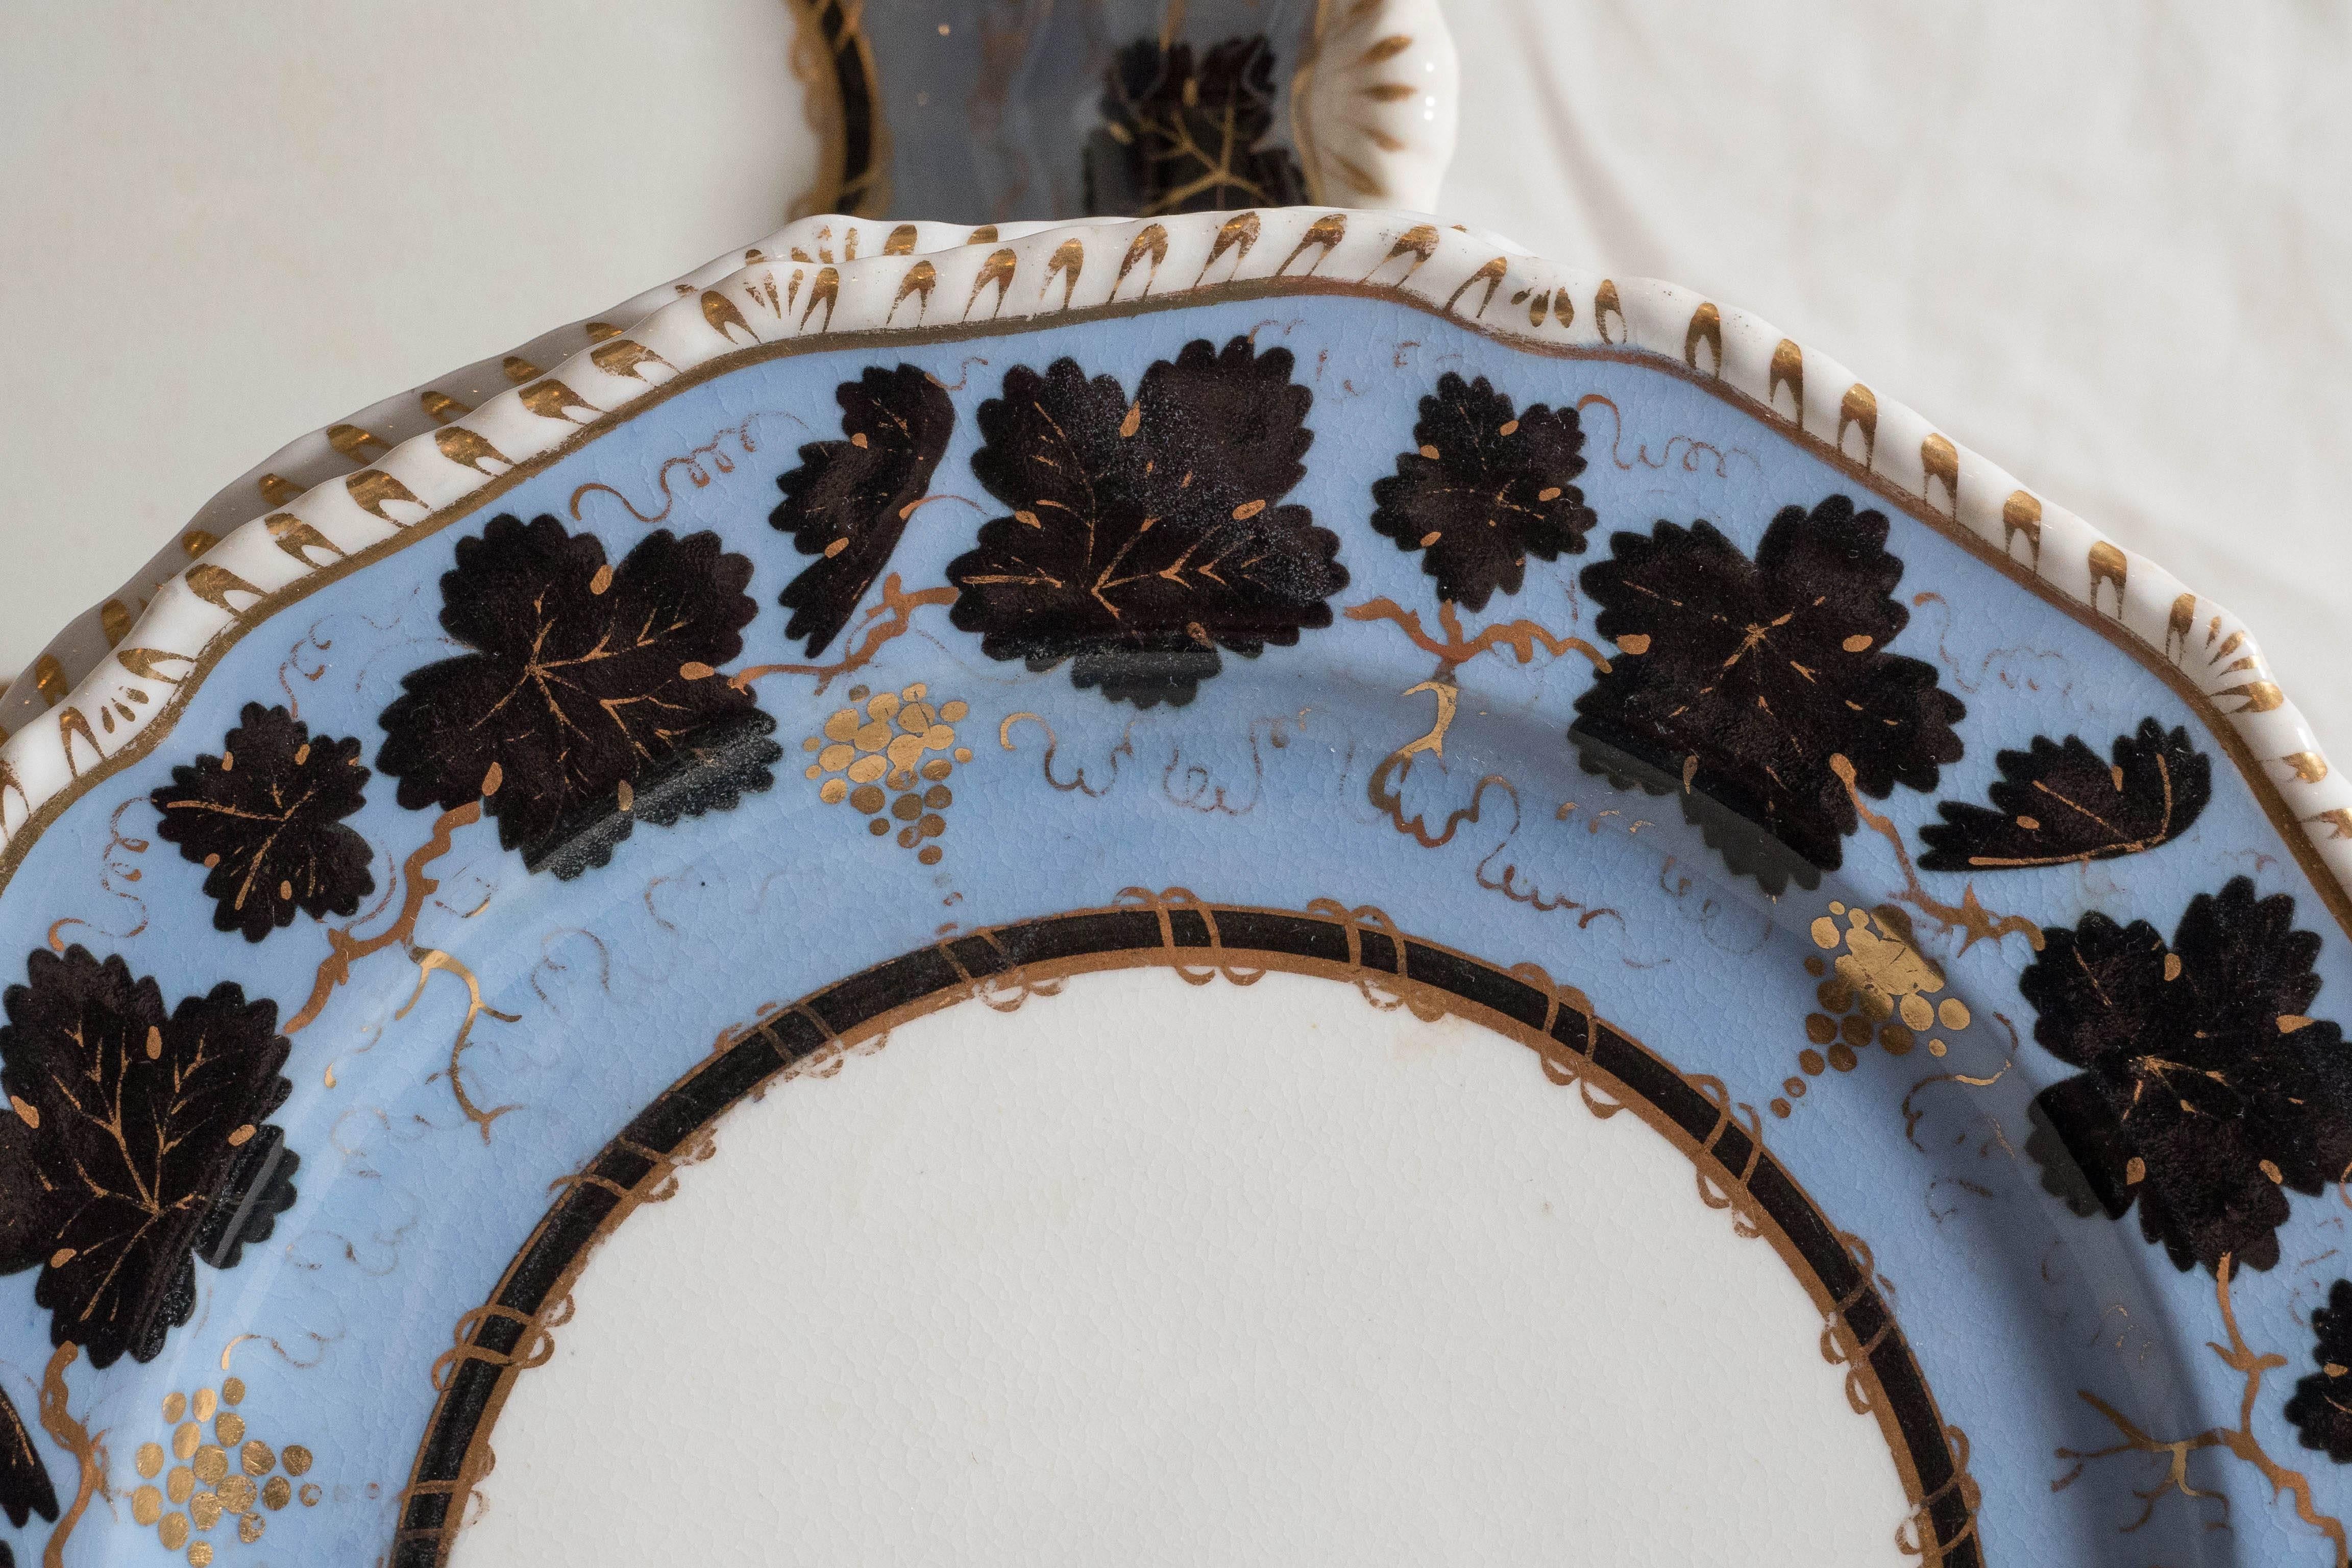 Two of the shaped dishes (the oval and one shell shape) are sold. The price of the set has been reduced accordingly.
An exquisite set of Derby Porcelain dishes painted with black leaves and gold grapes on a light blue background. The edge of the